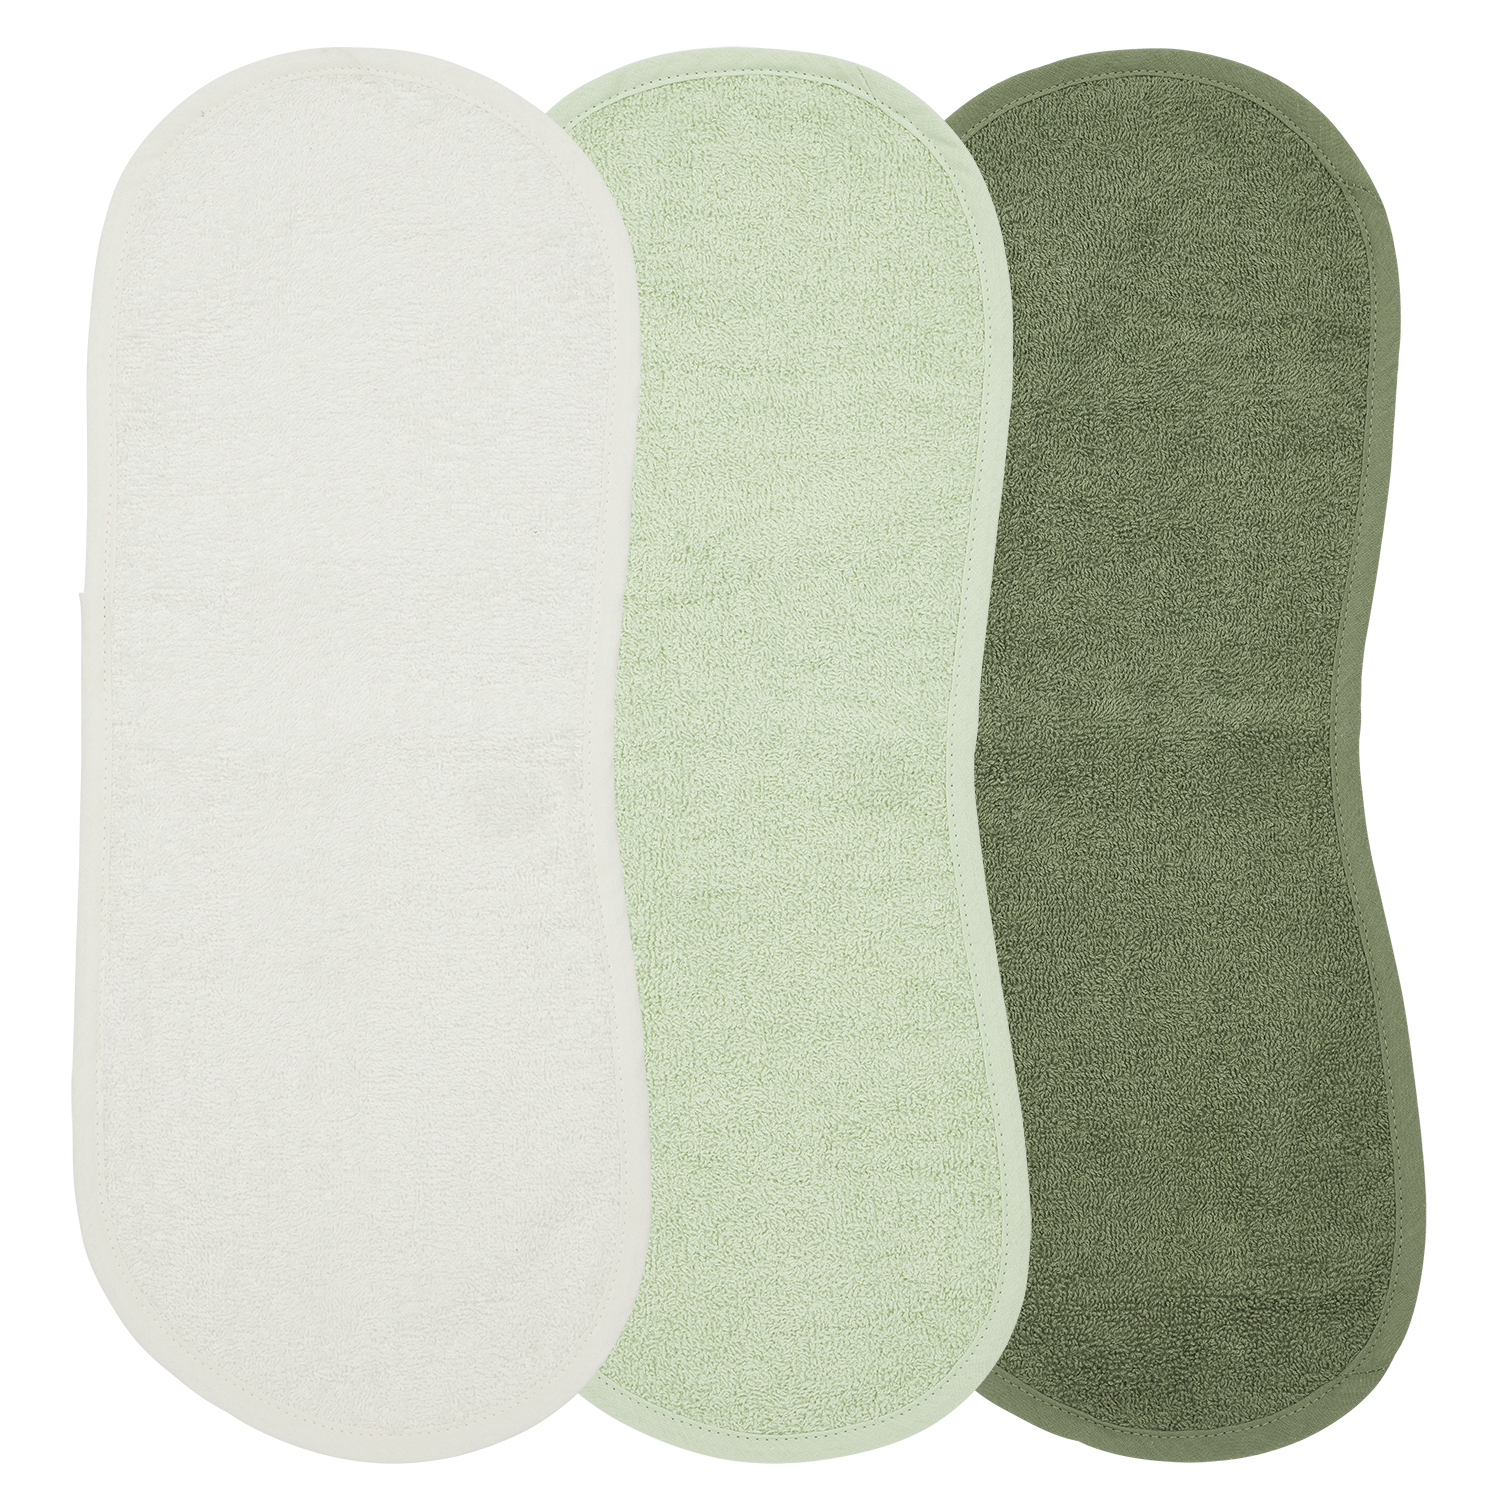 Burb cloth 3-pack terry Uni - offwhite/soft green/forest green - 53x20cm